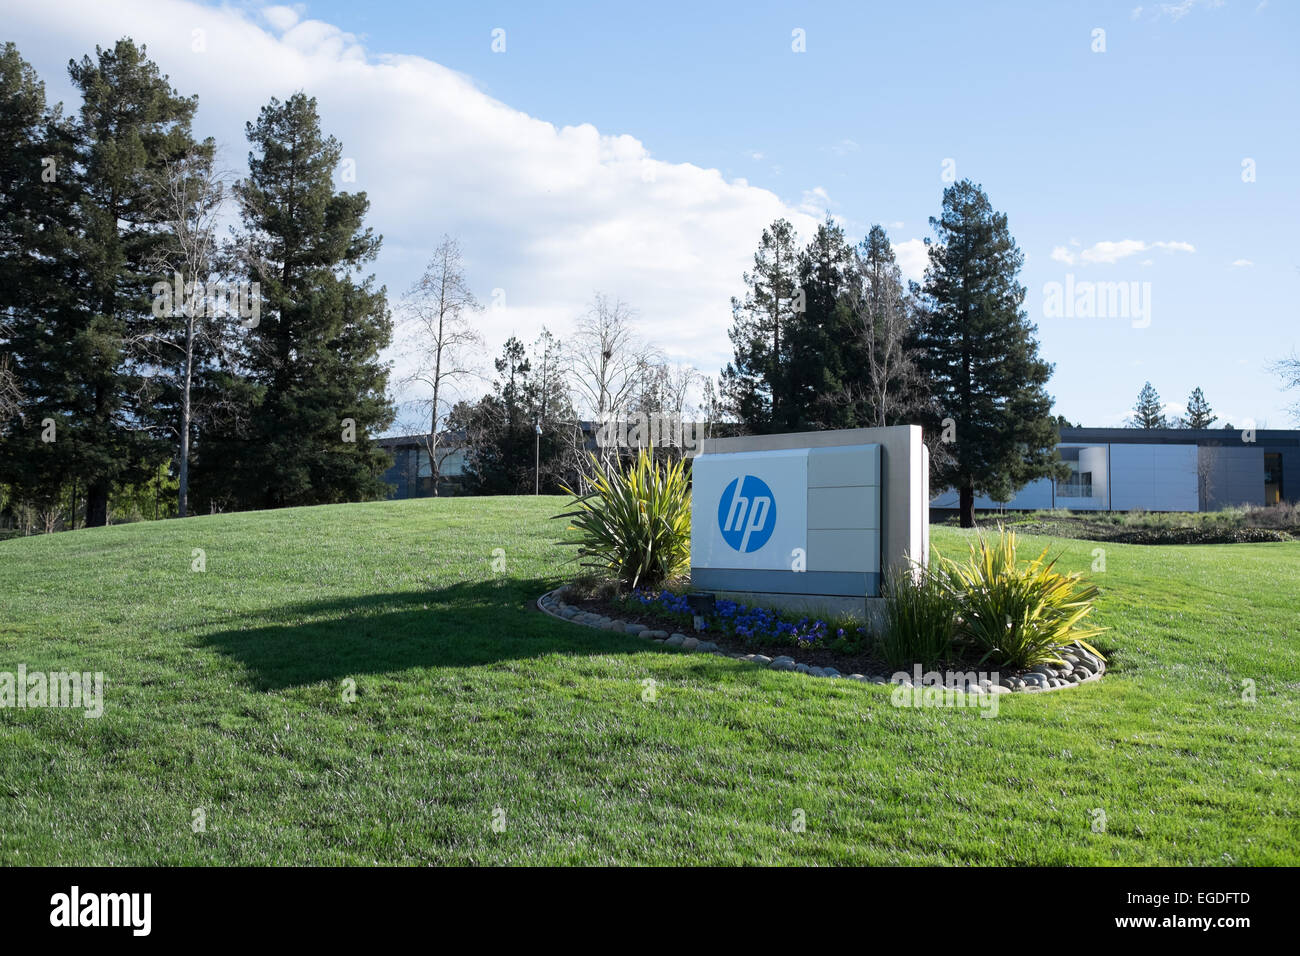 HP Labs, Spitzenforschung an HP. Page Mill Road, Palo Alto, CA. Stockfoto